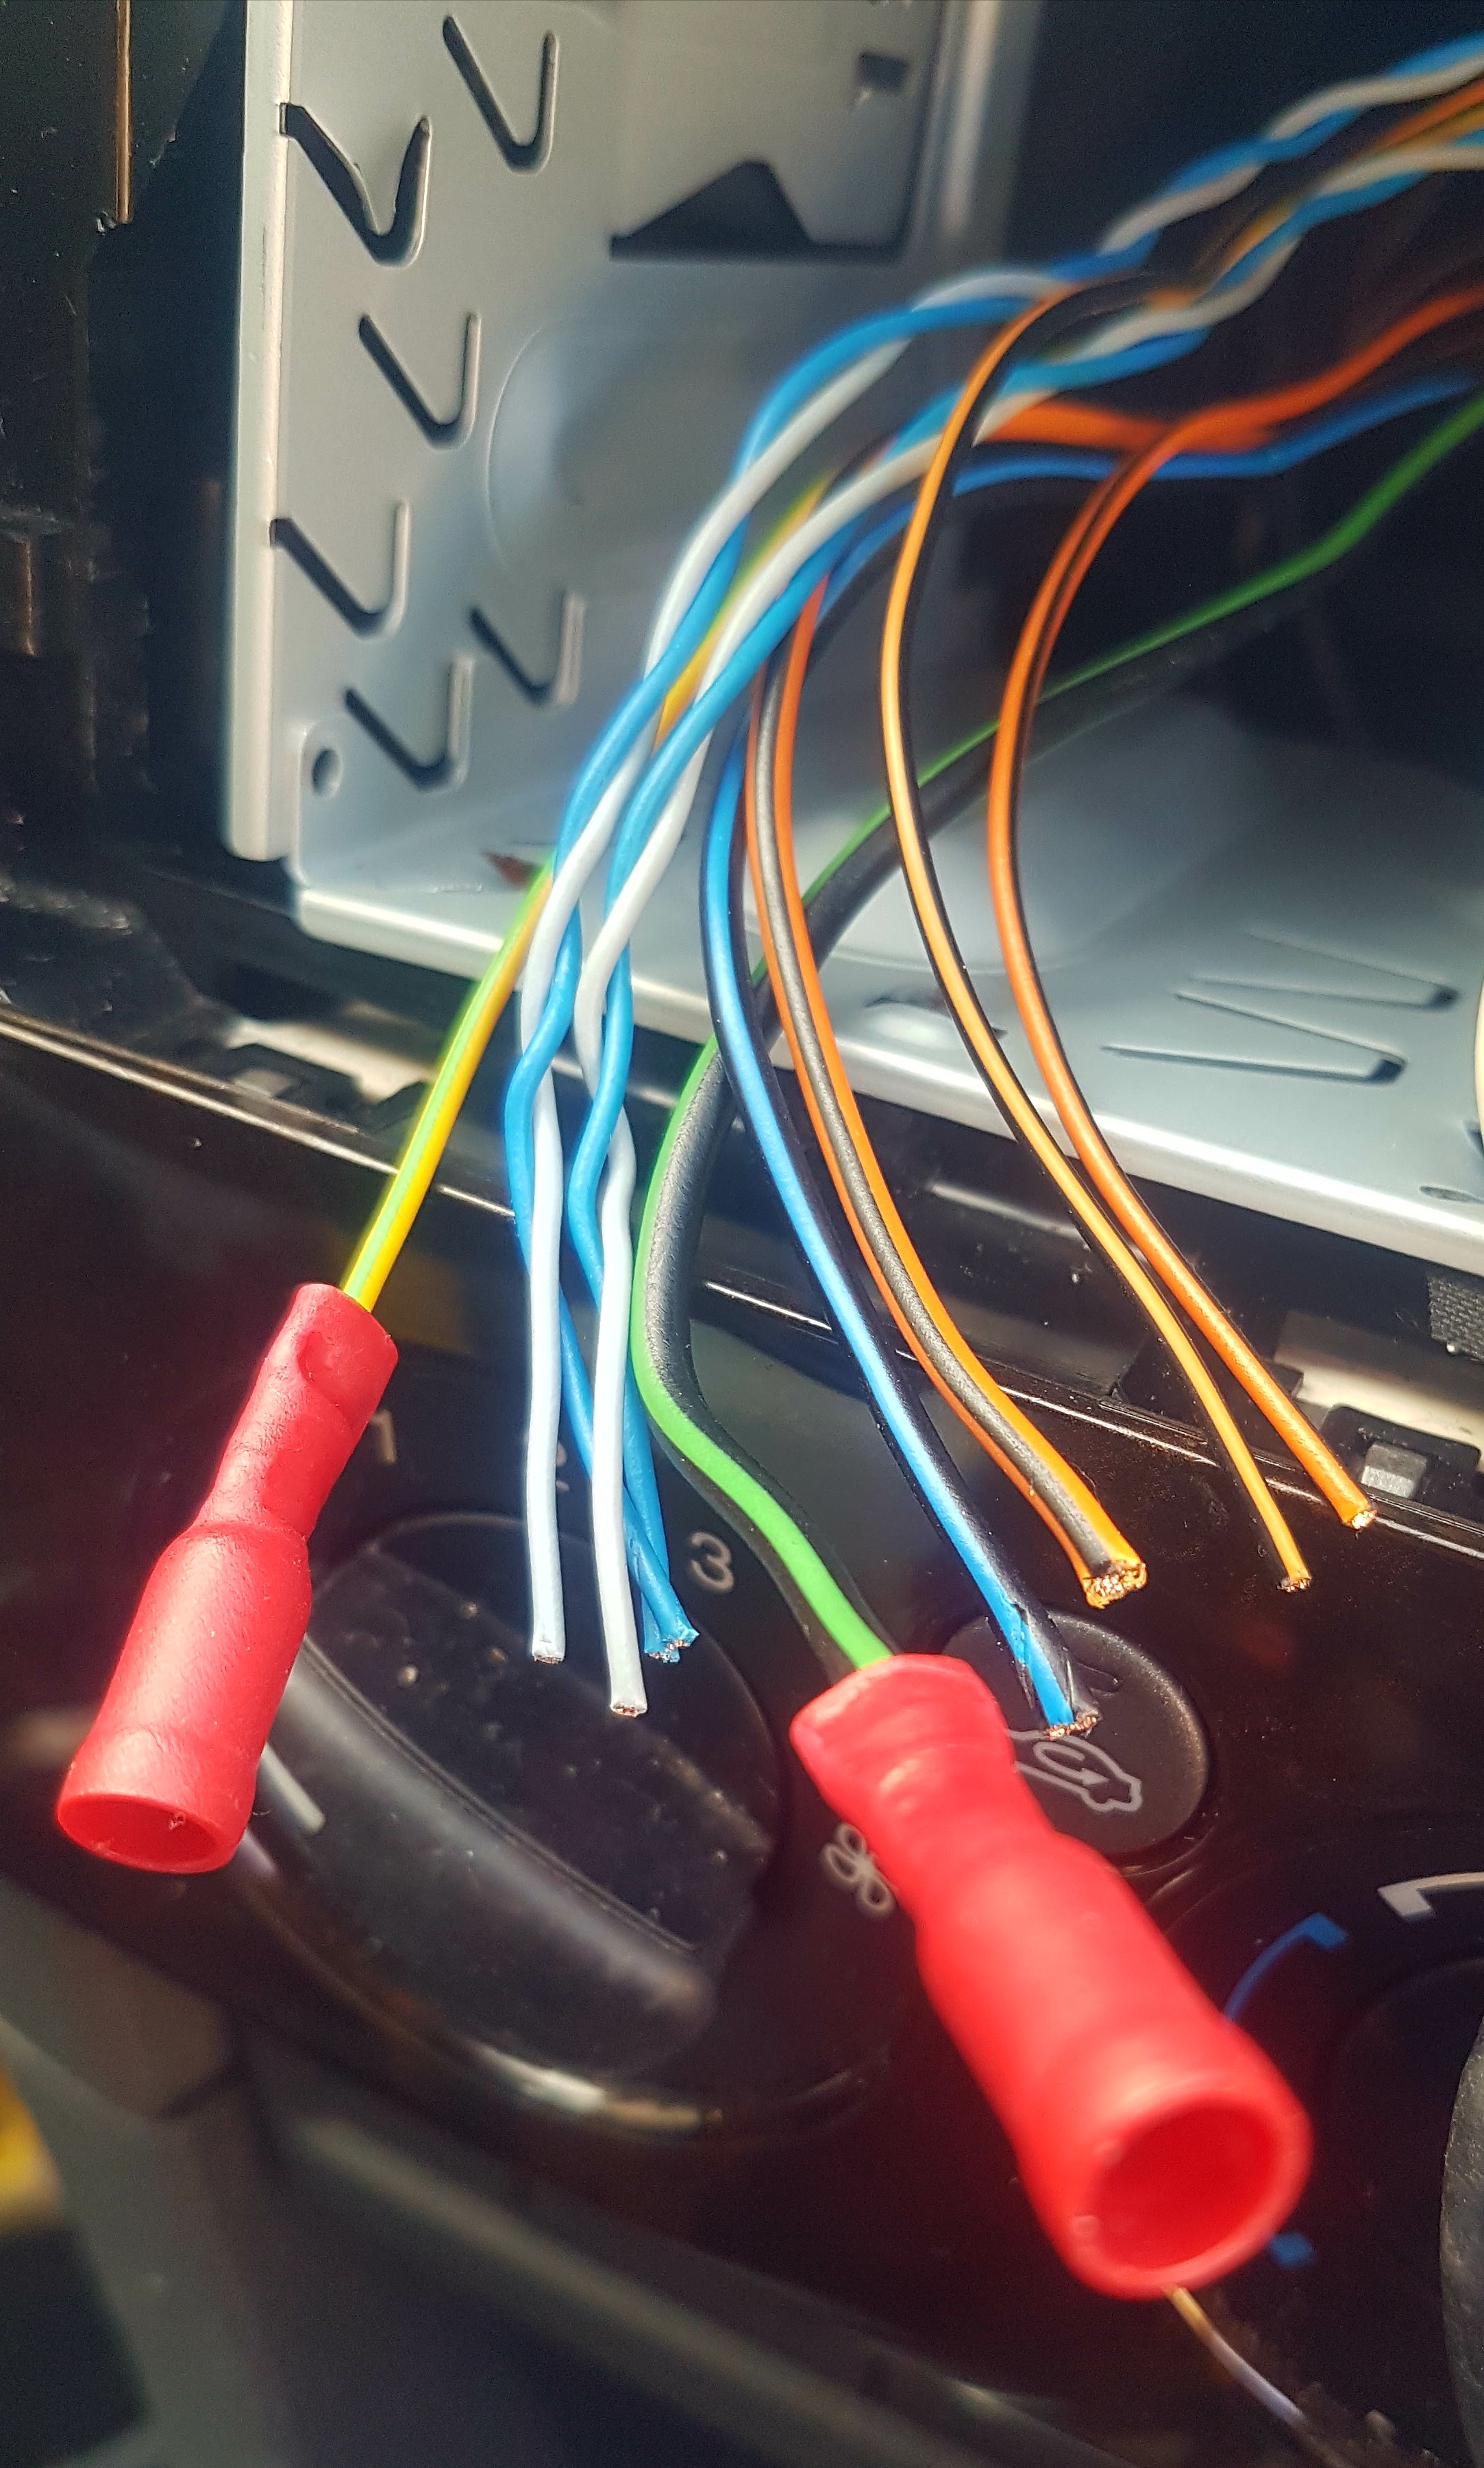 Radio wiring colour coding assistance needed - Ford Focus Club - Ford